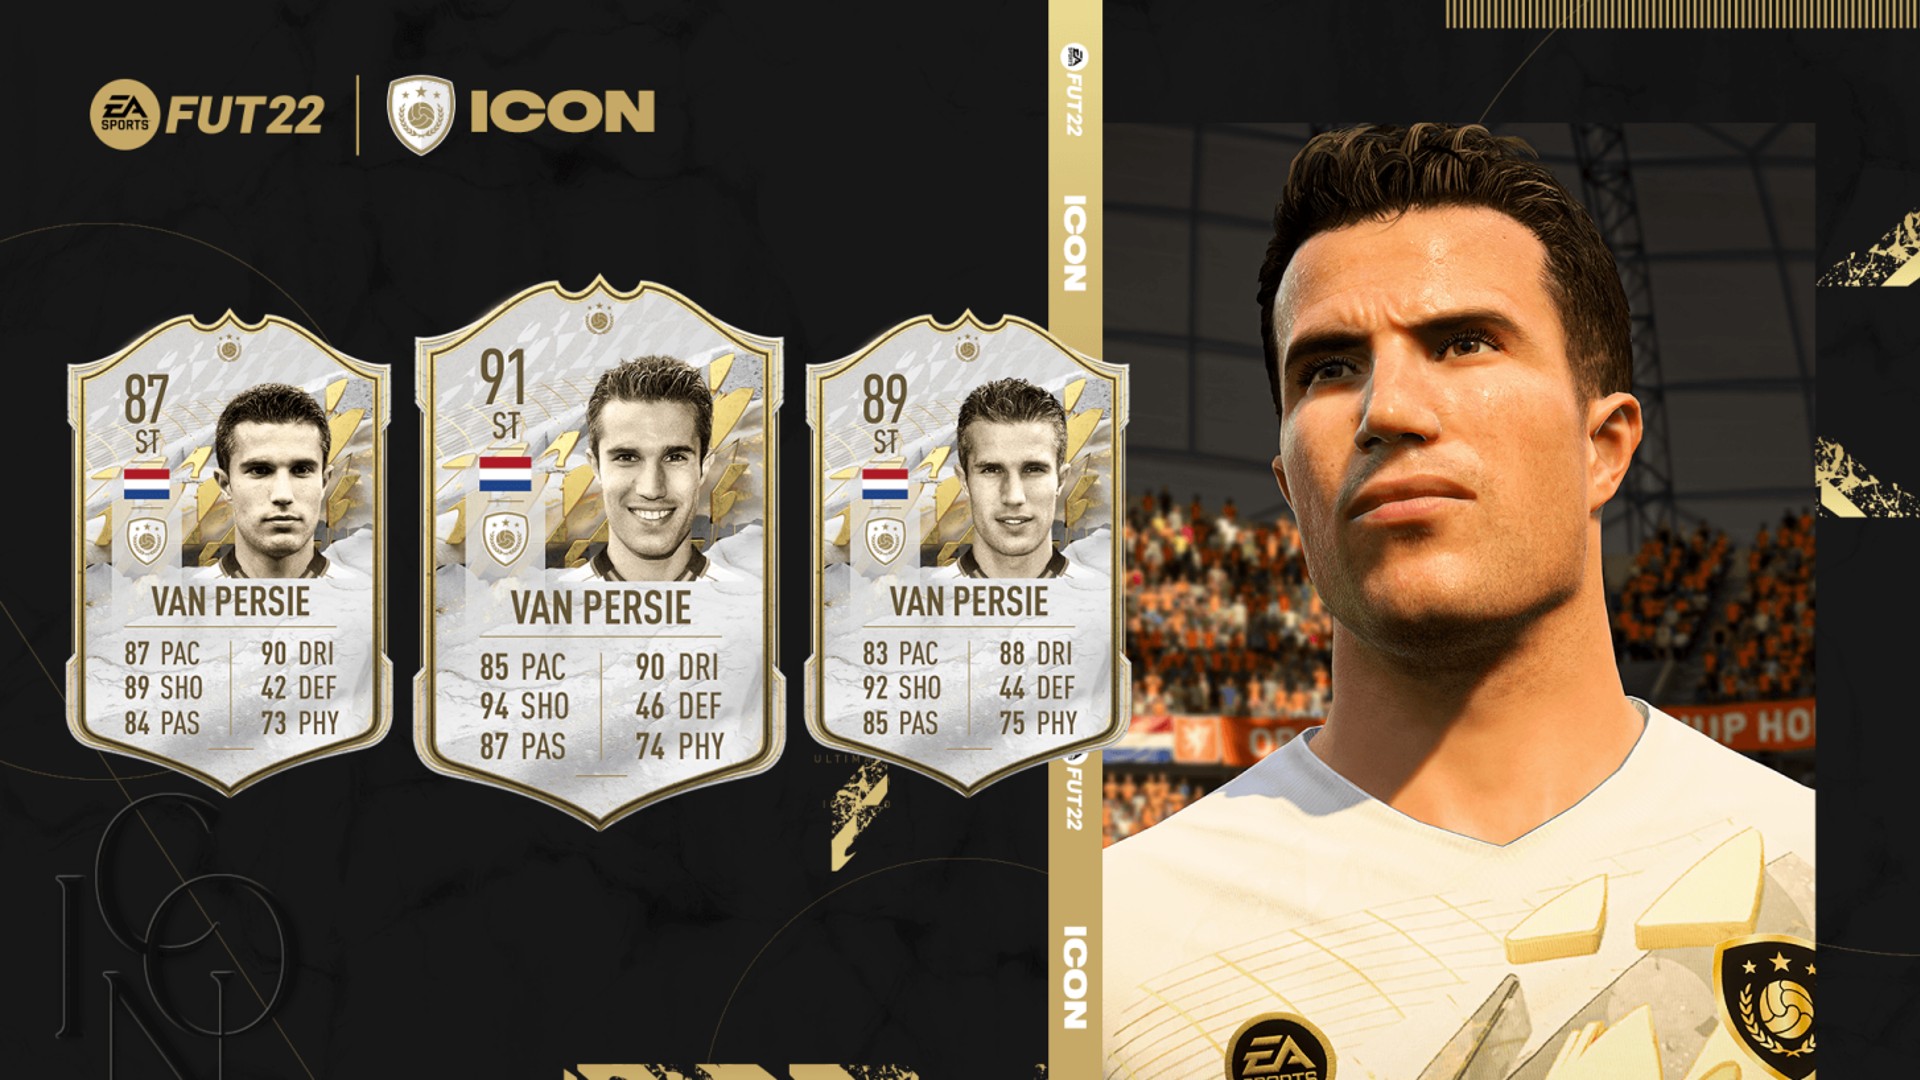 FIFA 22 new Icons: A graphic showing the three Icon cards for van Persie in FIFA 22